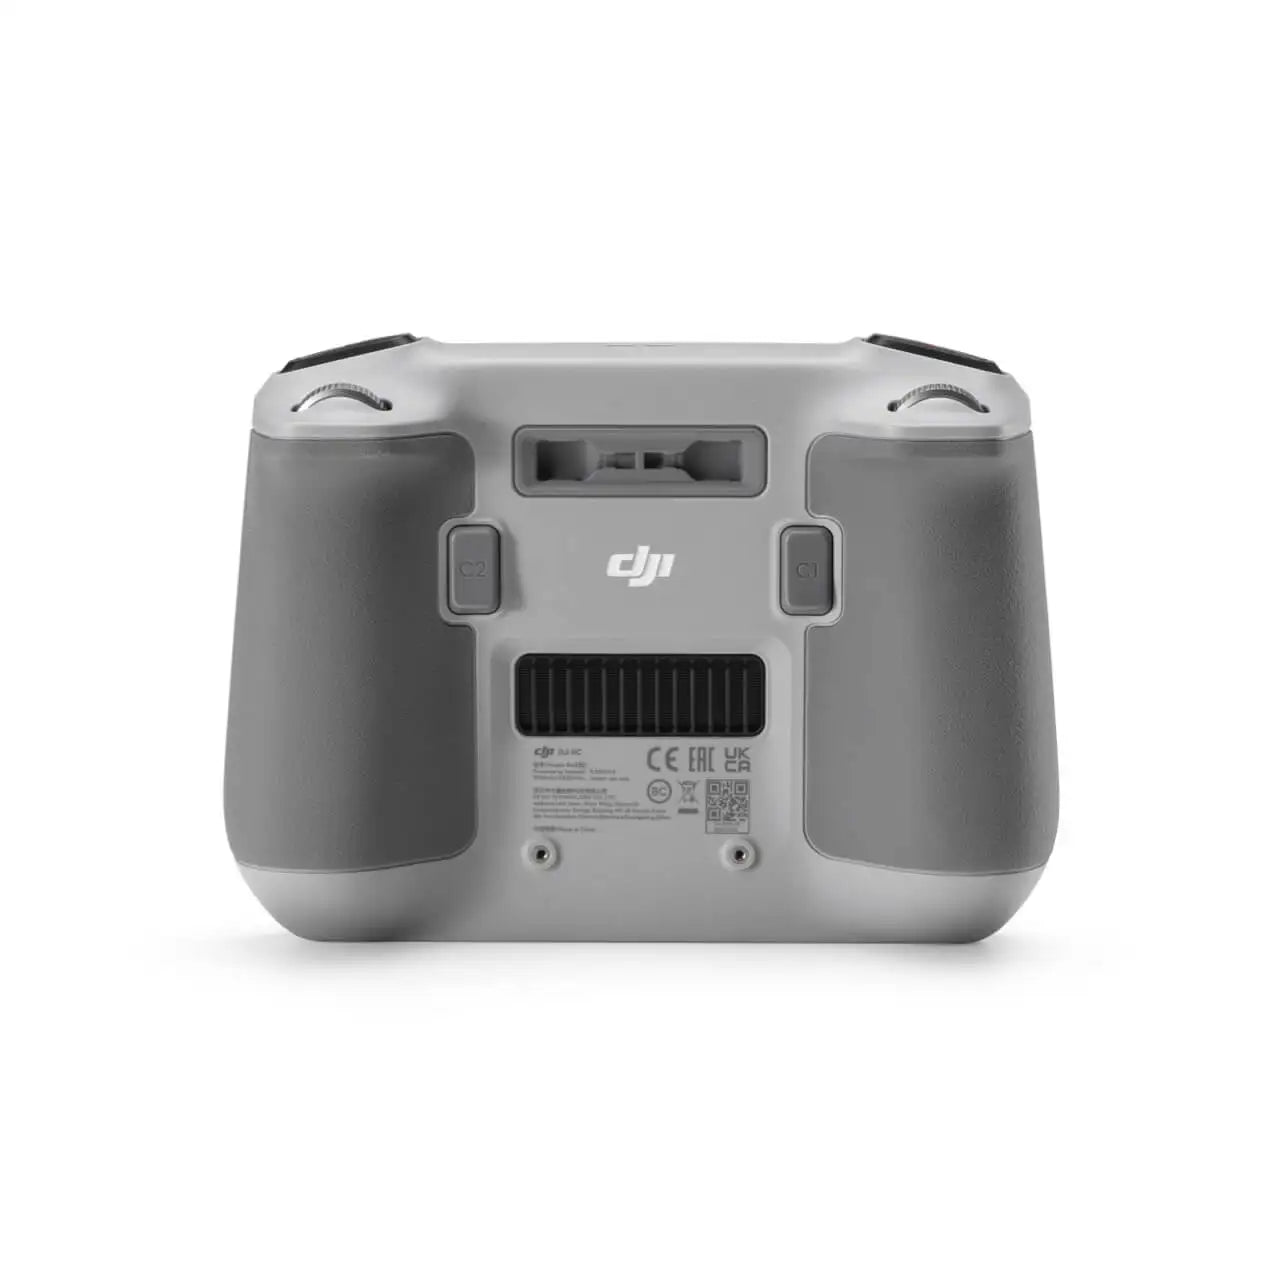 DJI RC Remote Controller, Visit the official website for the latest information